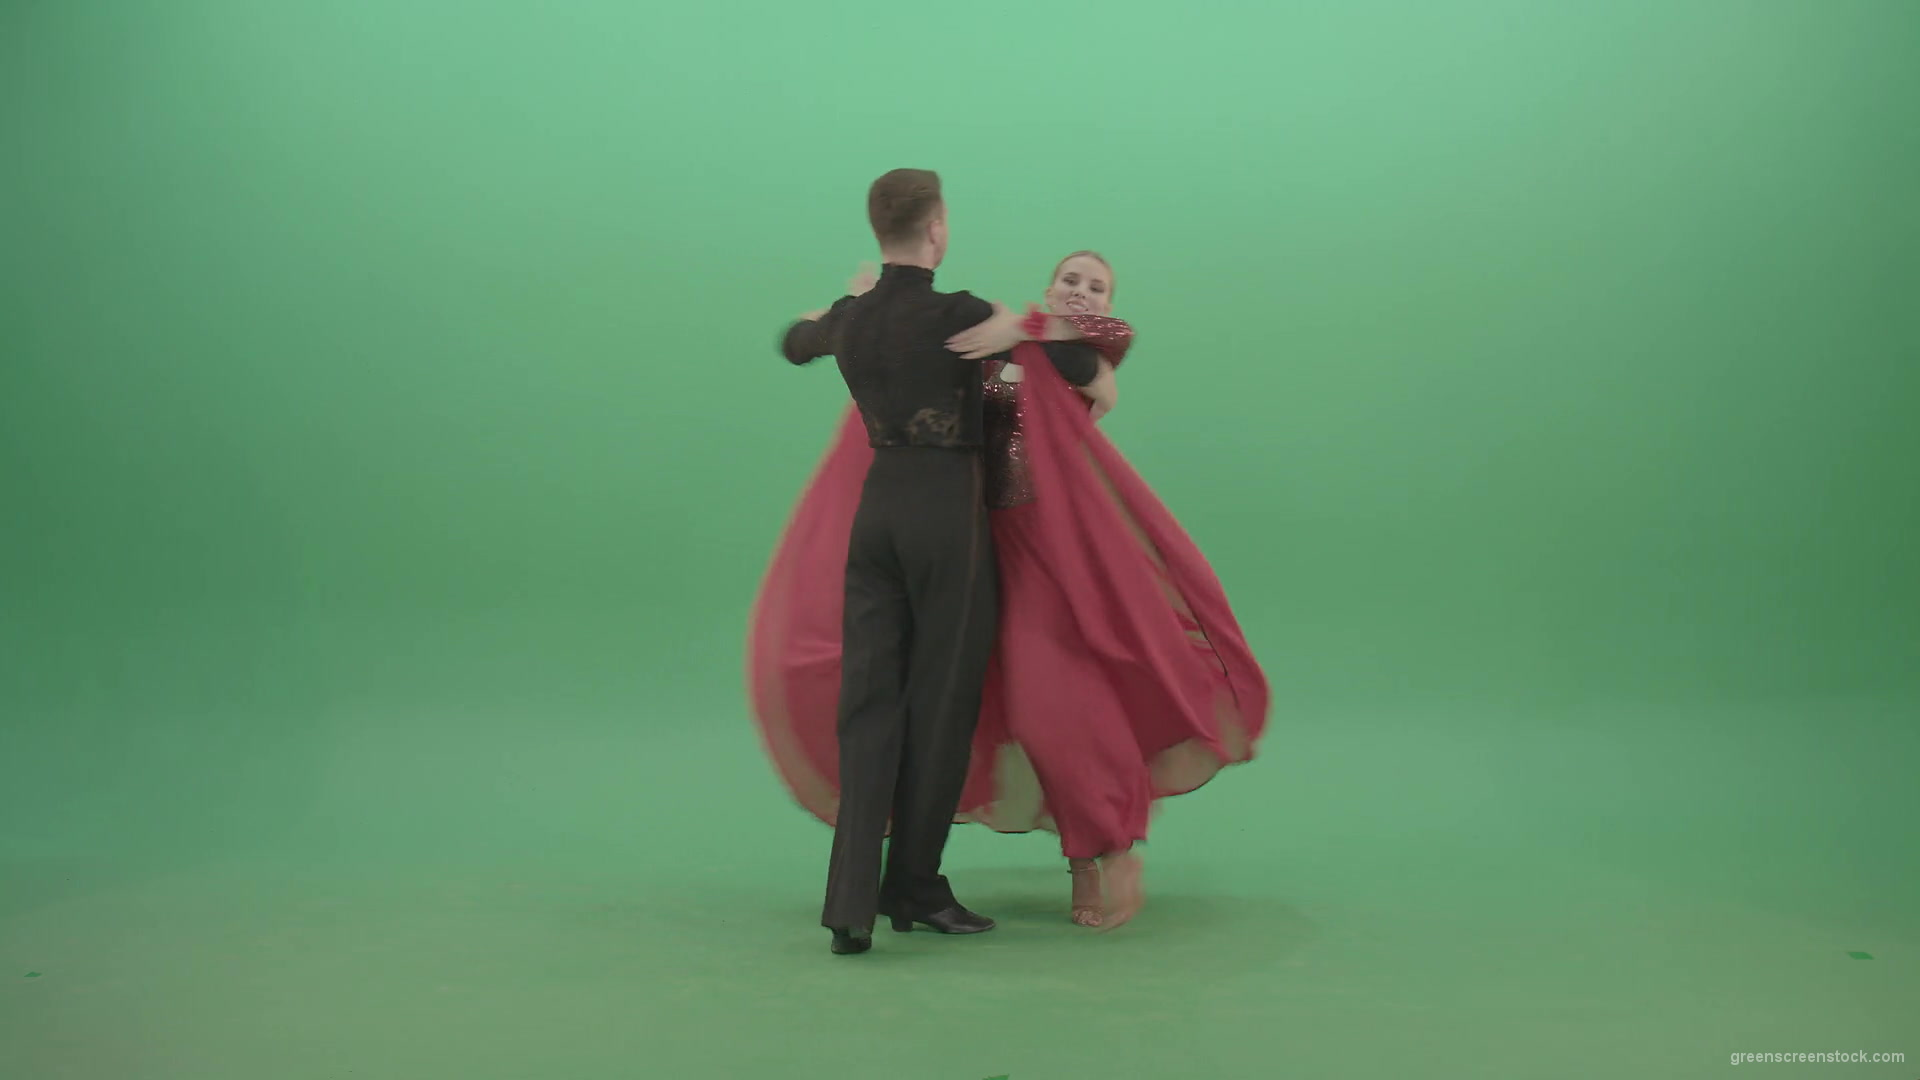 Young-couple-in-red-black-costume-spinning-dancing-ballroom-latina-dance-over-green-screen-4K-Video-Footage-1920_007 Green Screen Stock